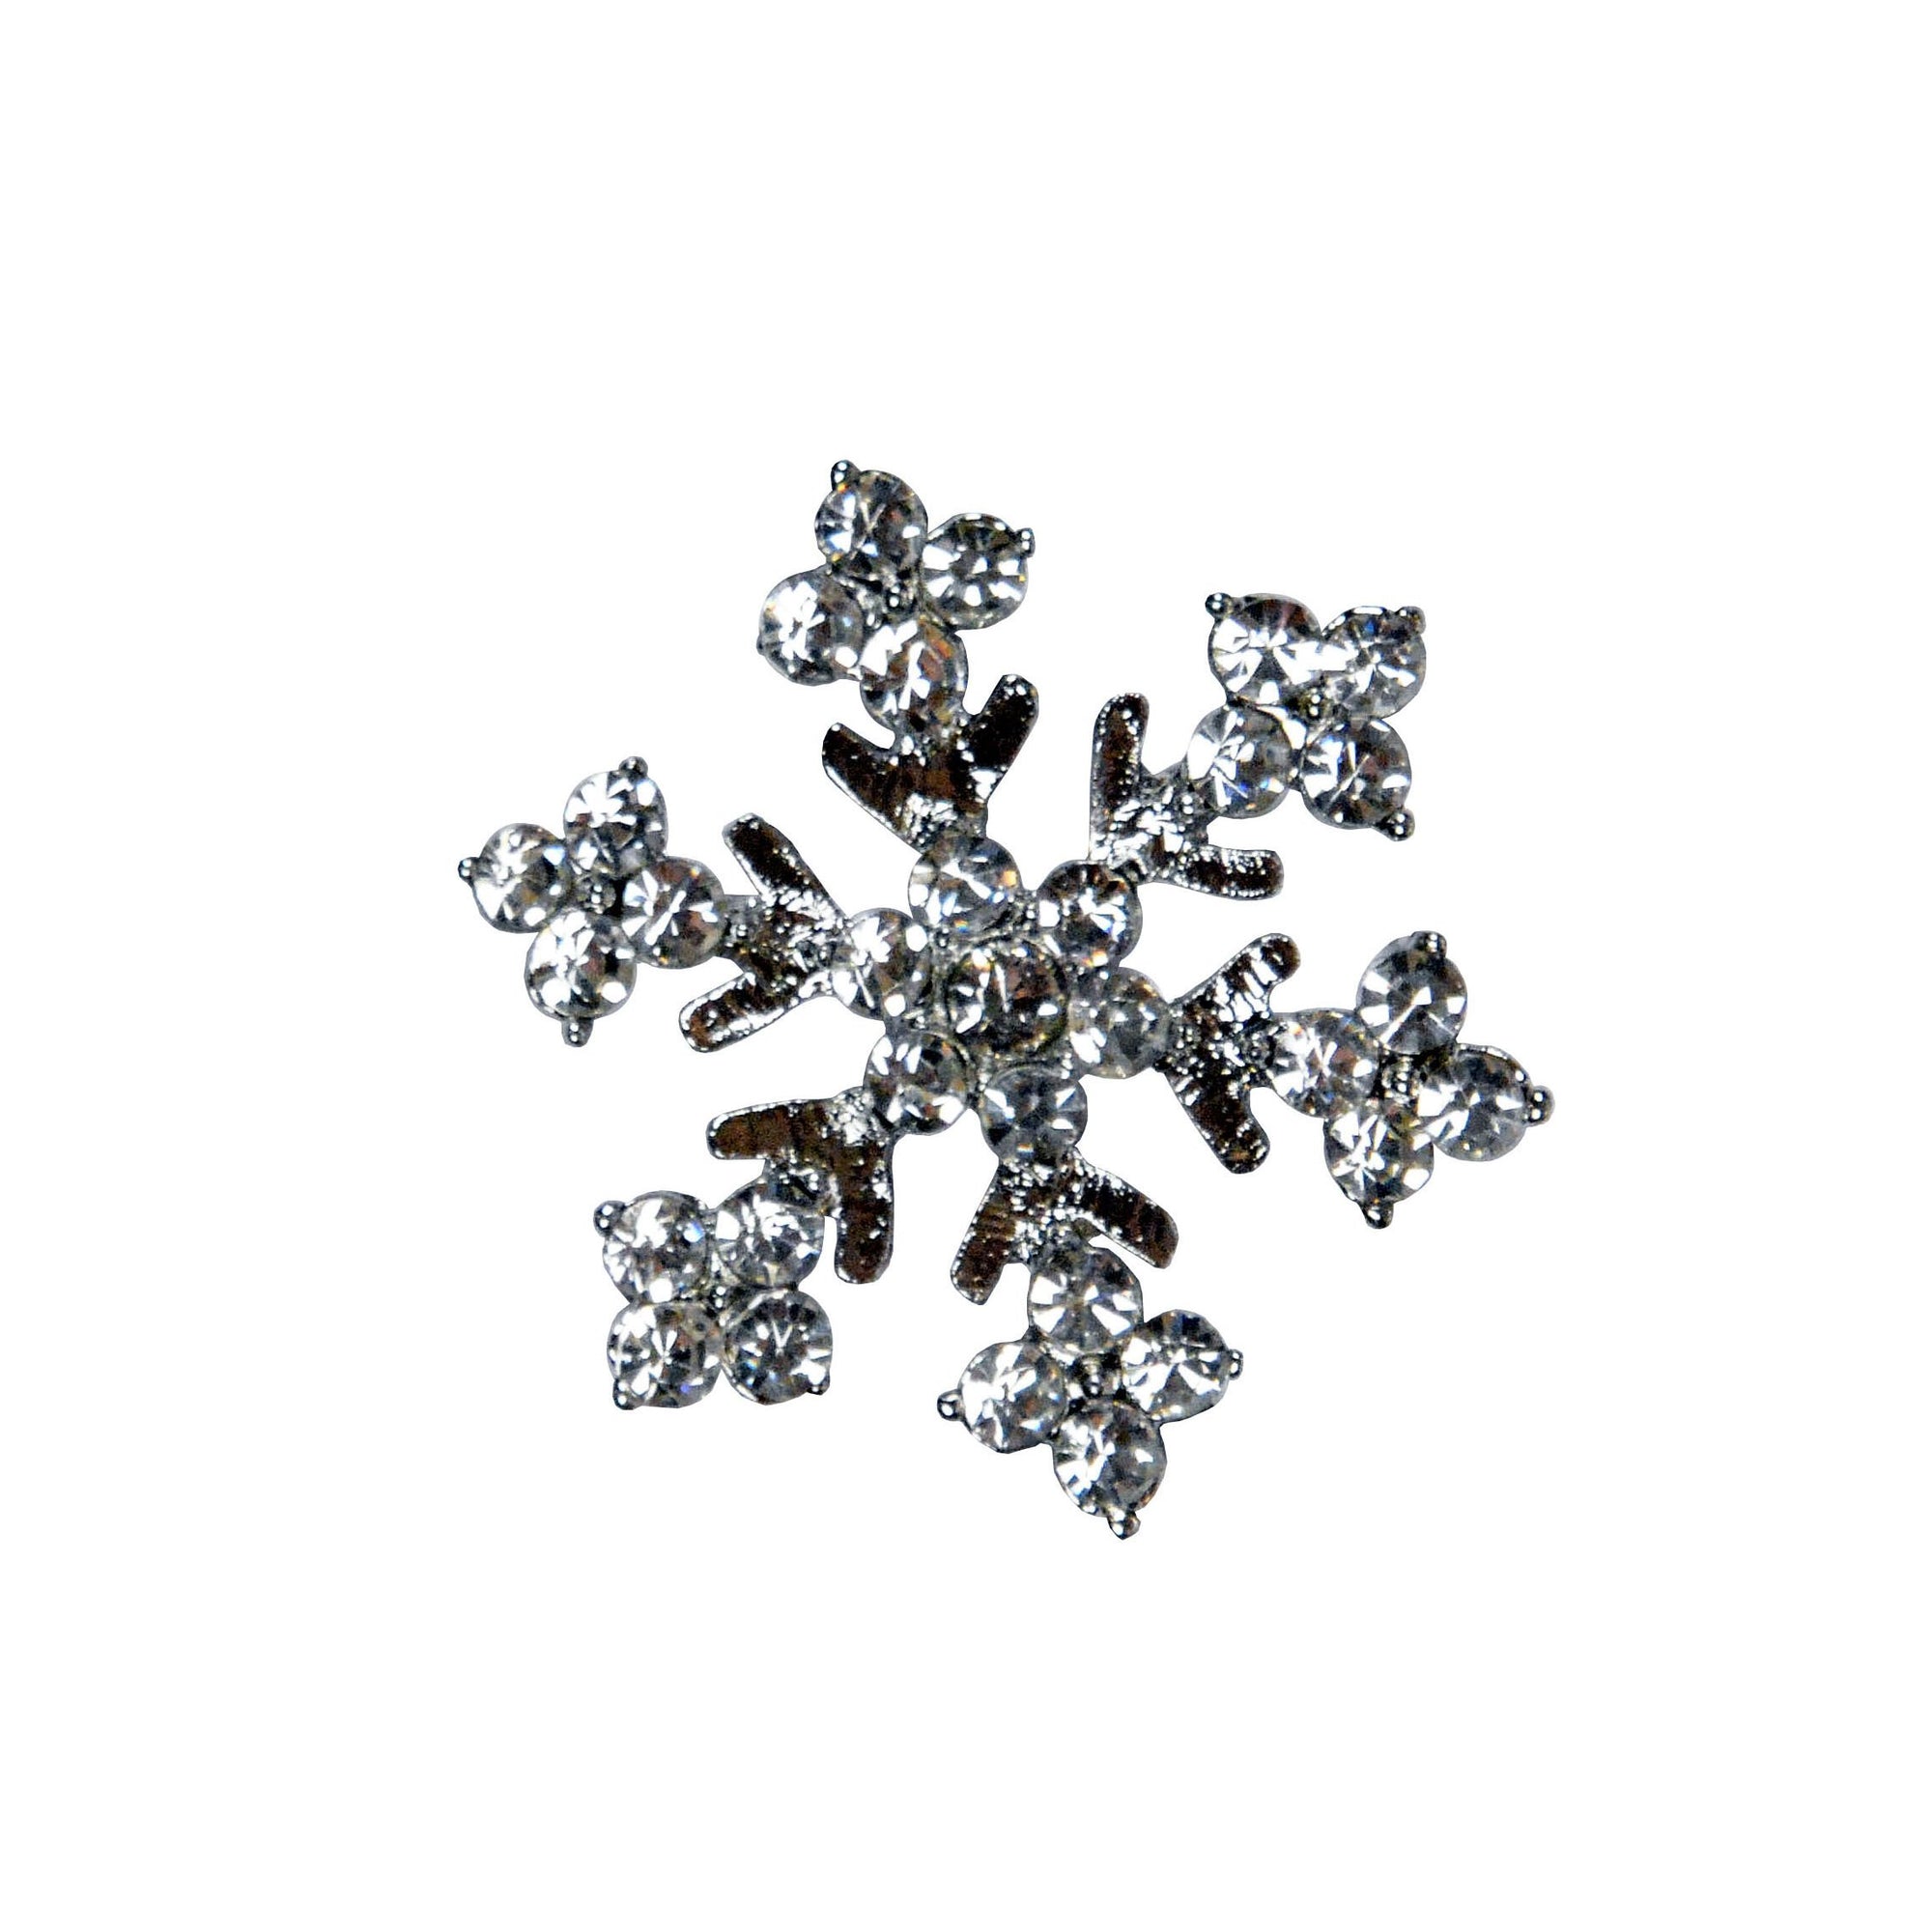 Rhinestone Brooch | Clear and Silver Large Snowflake | from Pandemonium Millinery